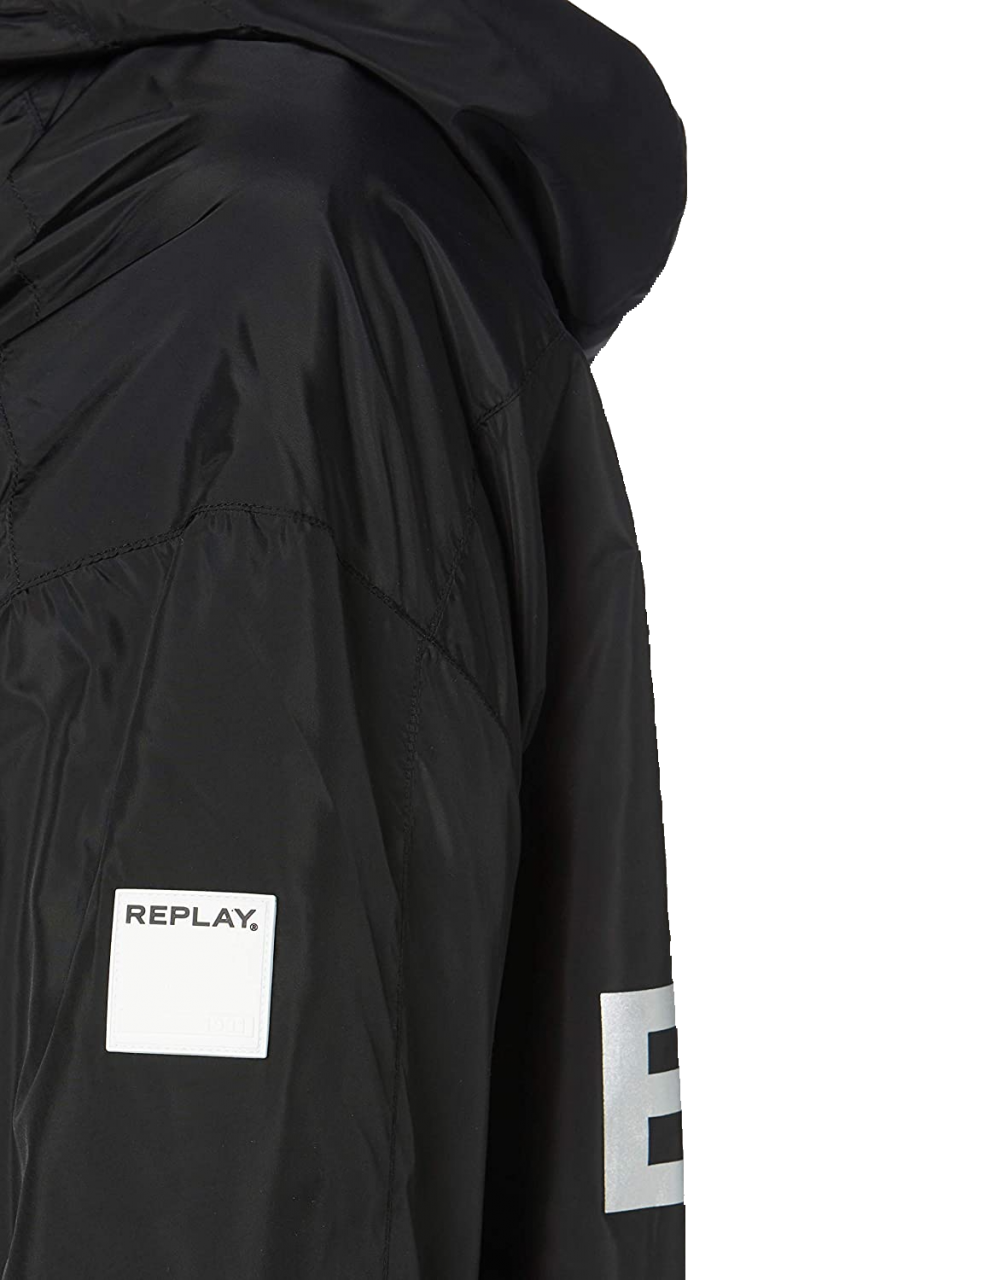 REPLAY REVERSIBLE JACKET WITH LOGO